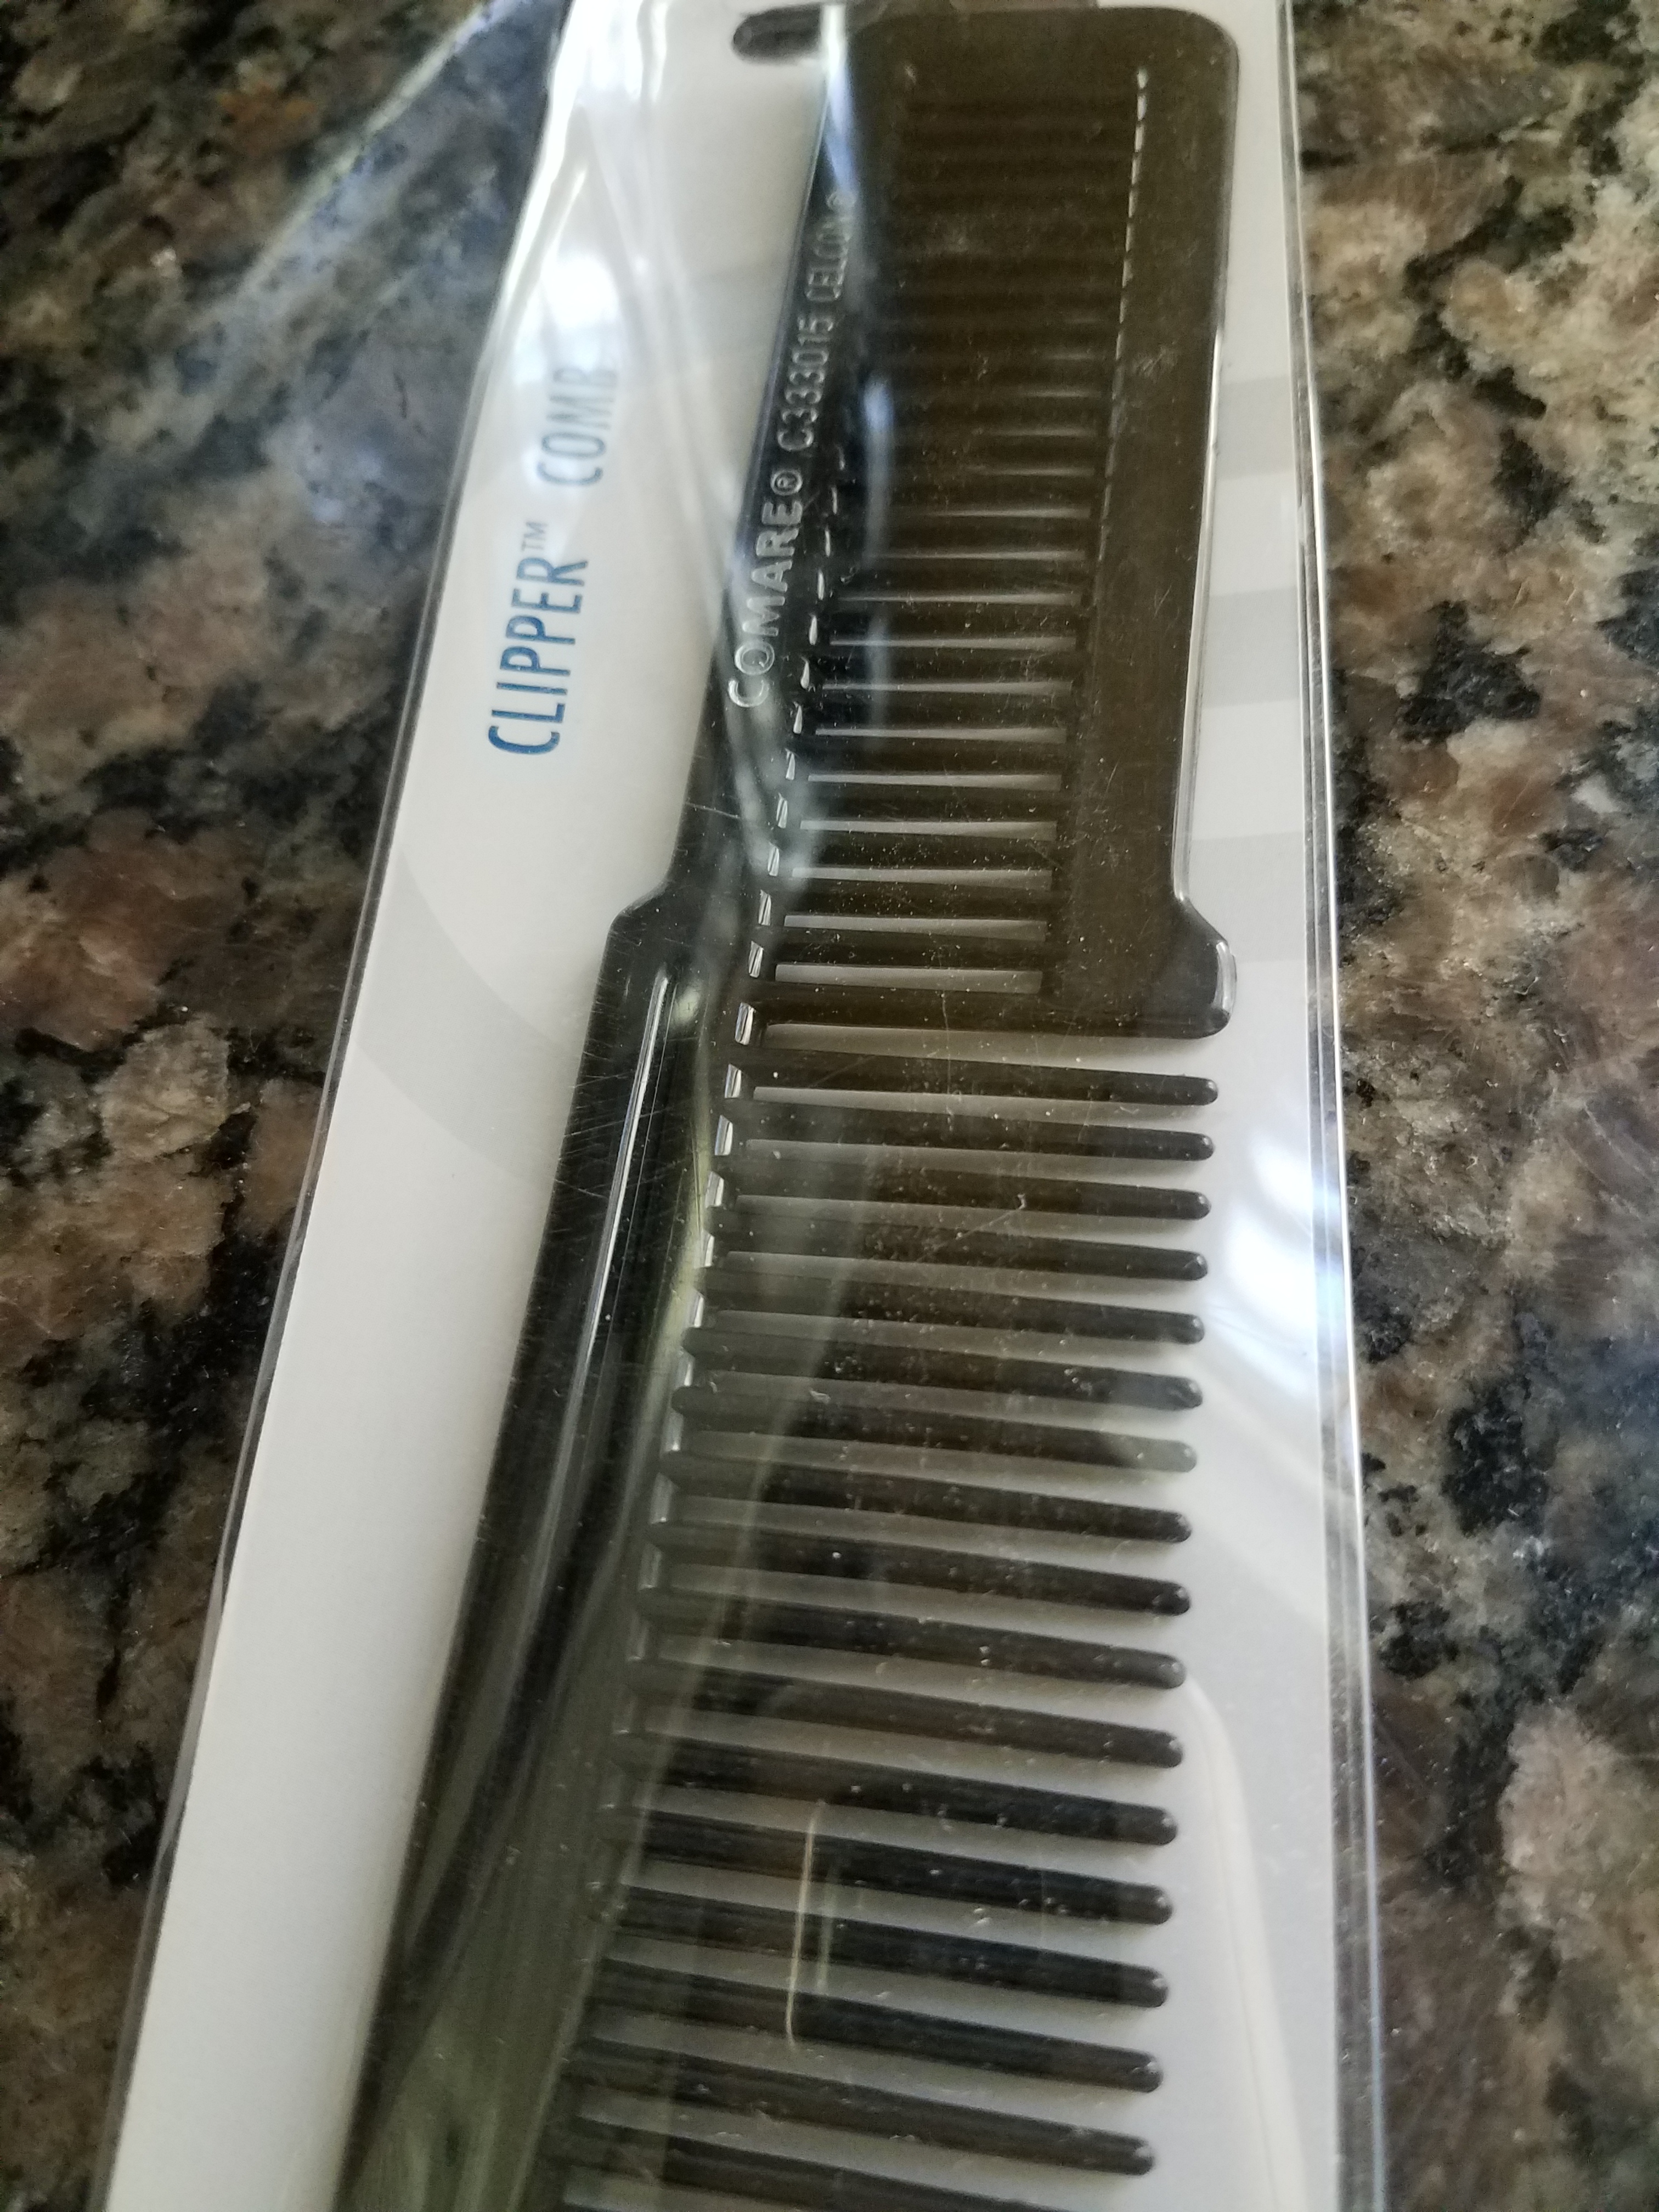 COMARE CLIPPER COMB #486 FROM POLLY PRODUCTS COMPANY